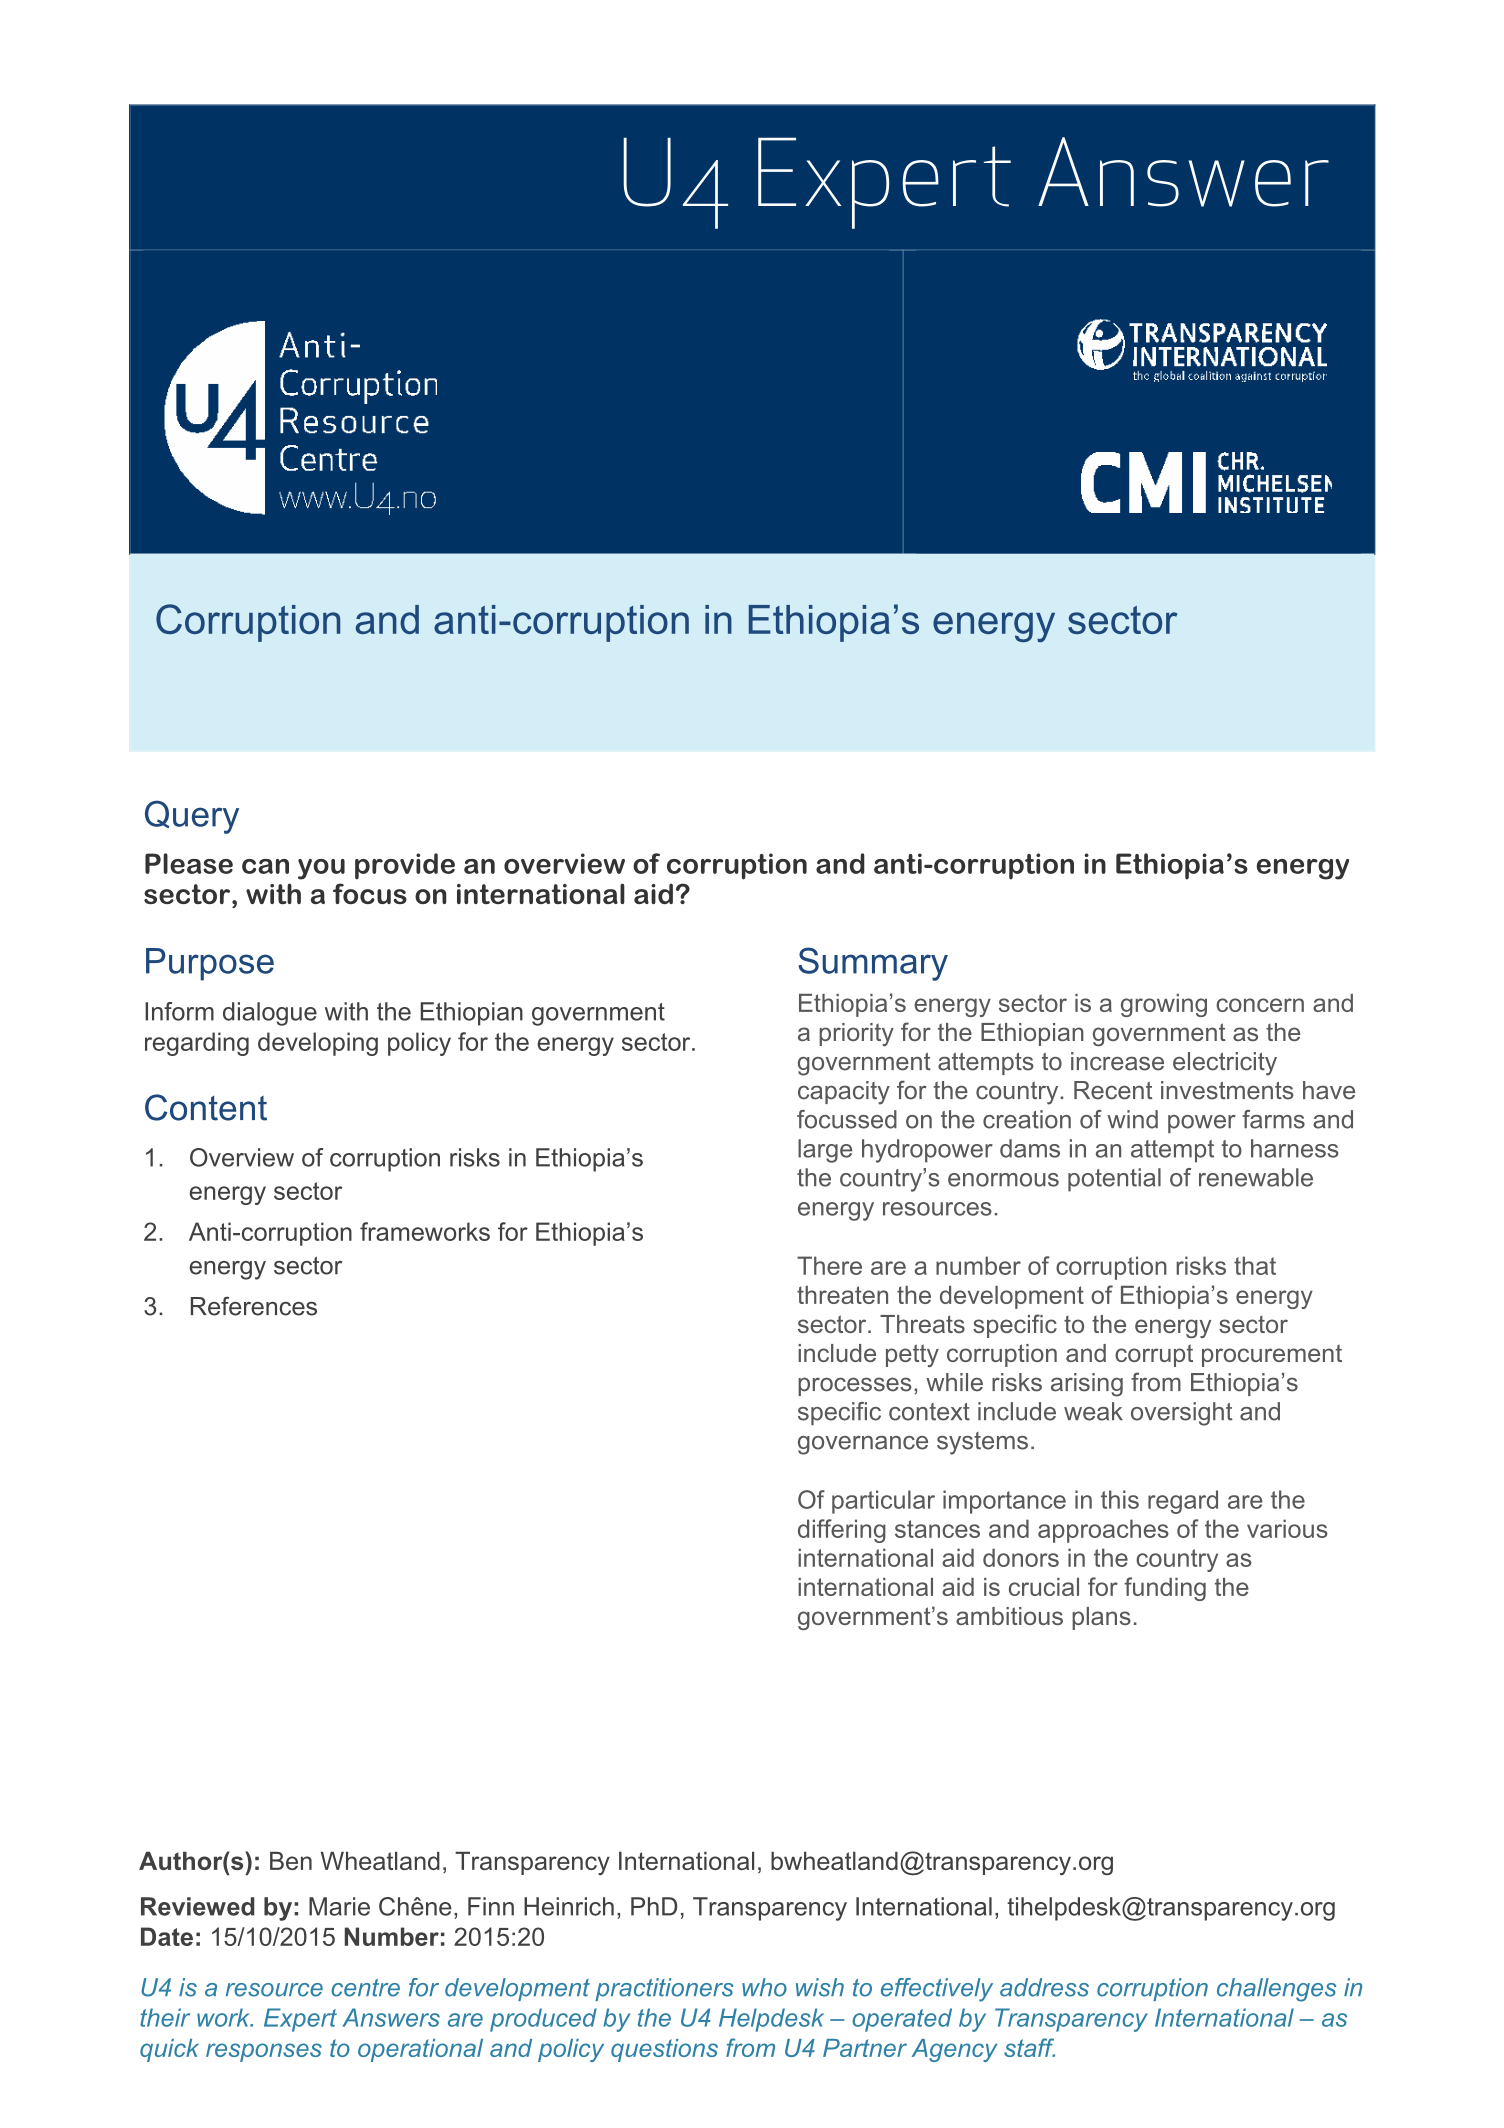 Corruption and anti-corruption in Ethiopia’s energy sector